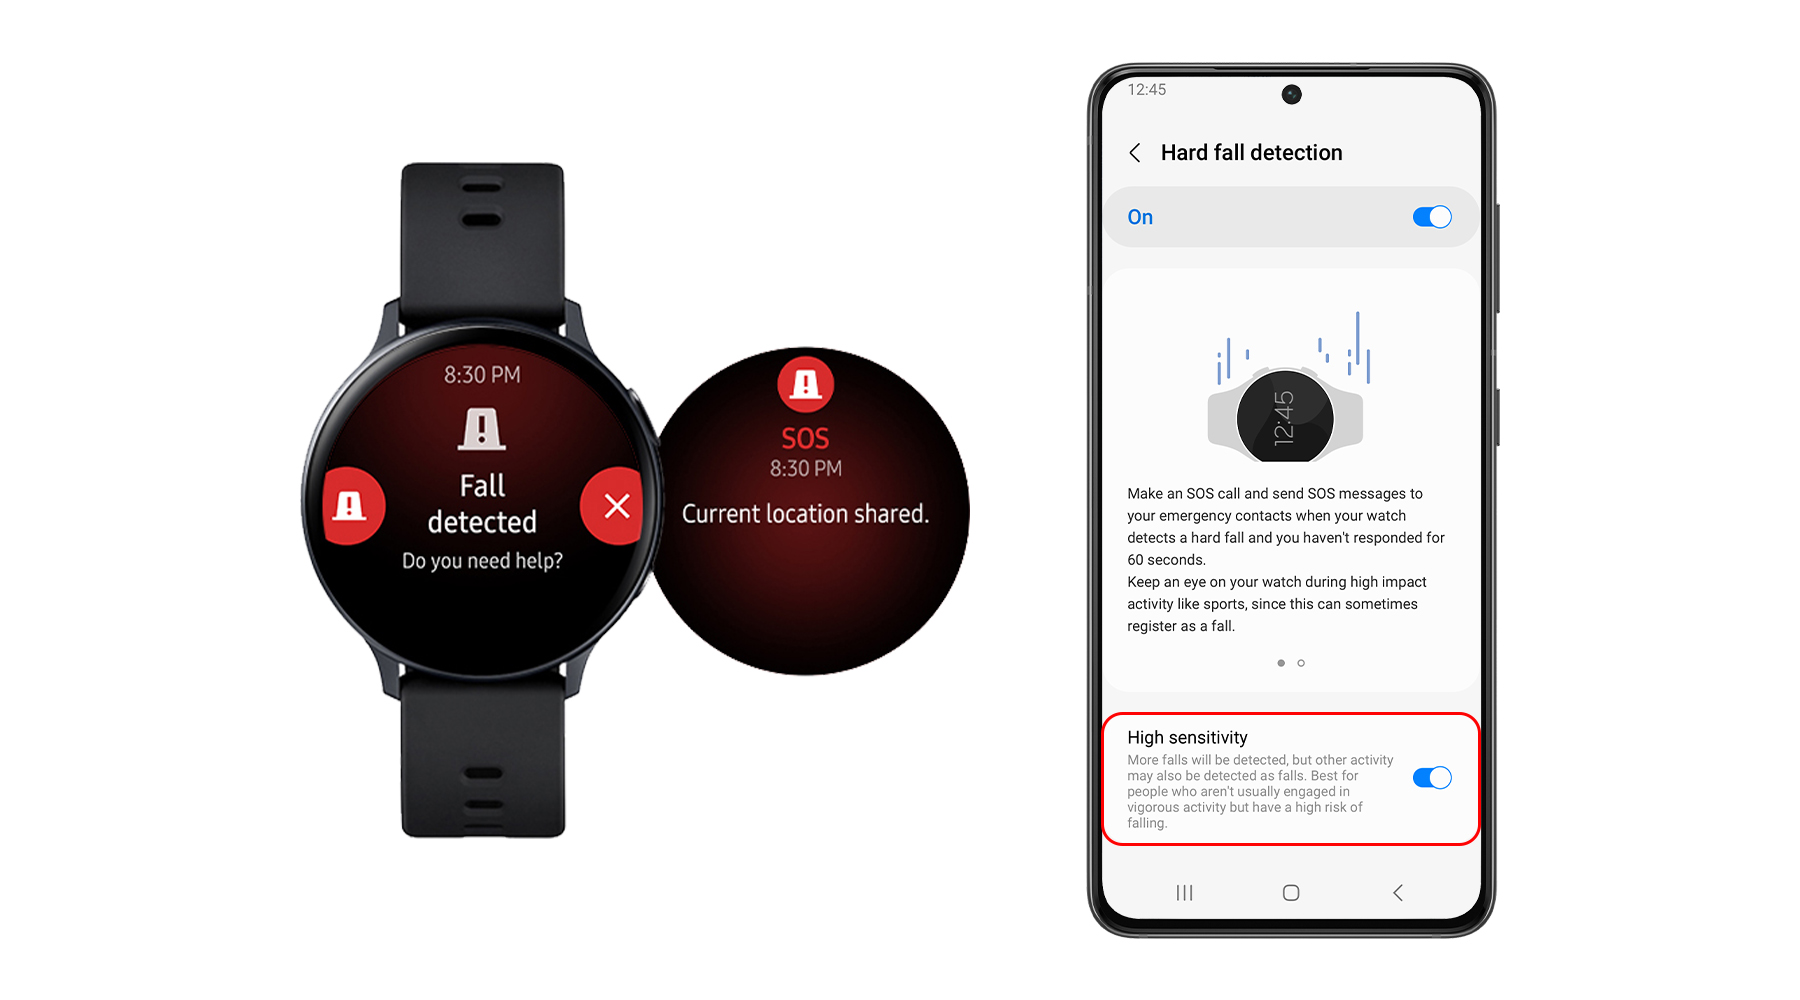 Samsung has added exclusive Galaxy Watch 4 features to older Galaxy Watch, Watch Active, Watch Active 2 and Watch 3 smartwatches